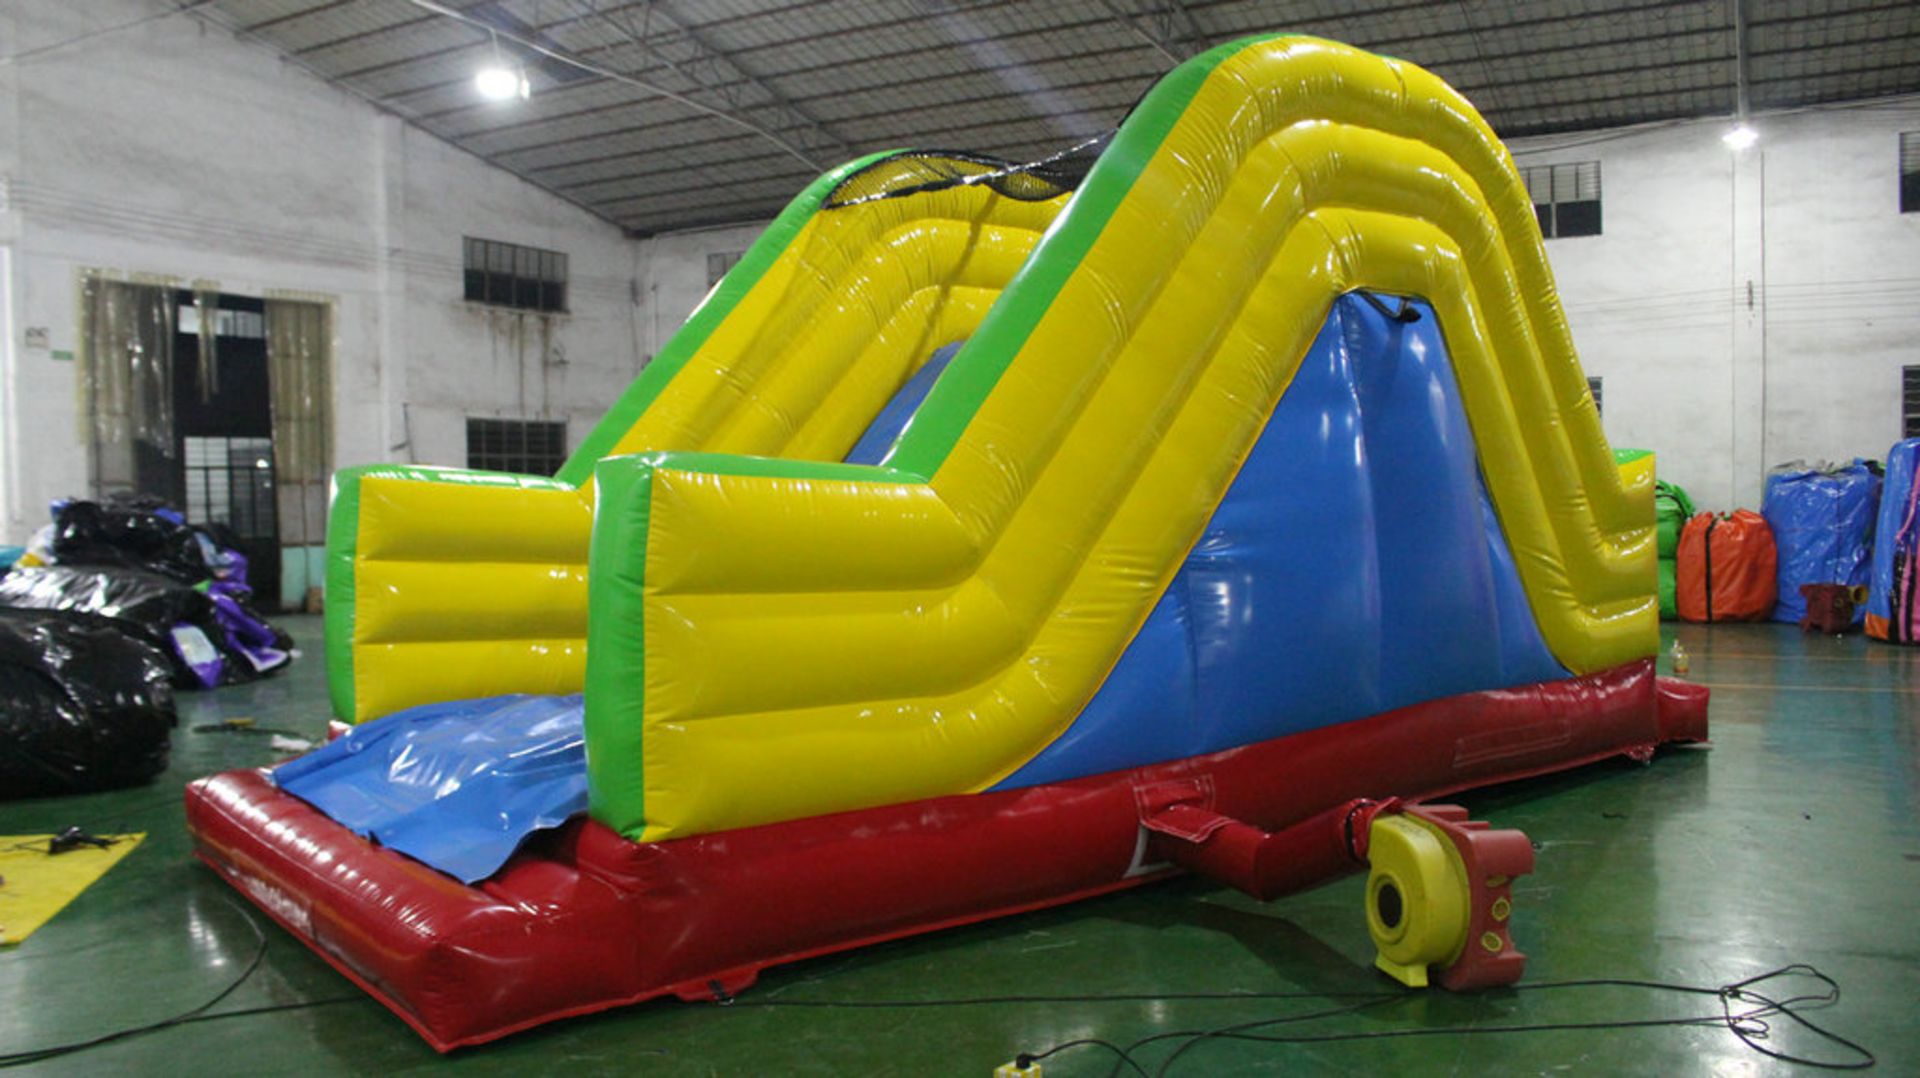 Colour Inflatable Obstacle Course comprising 15 as - Image 3 of 36